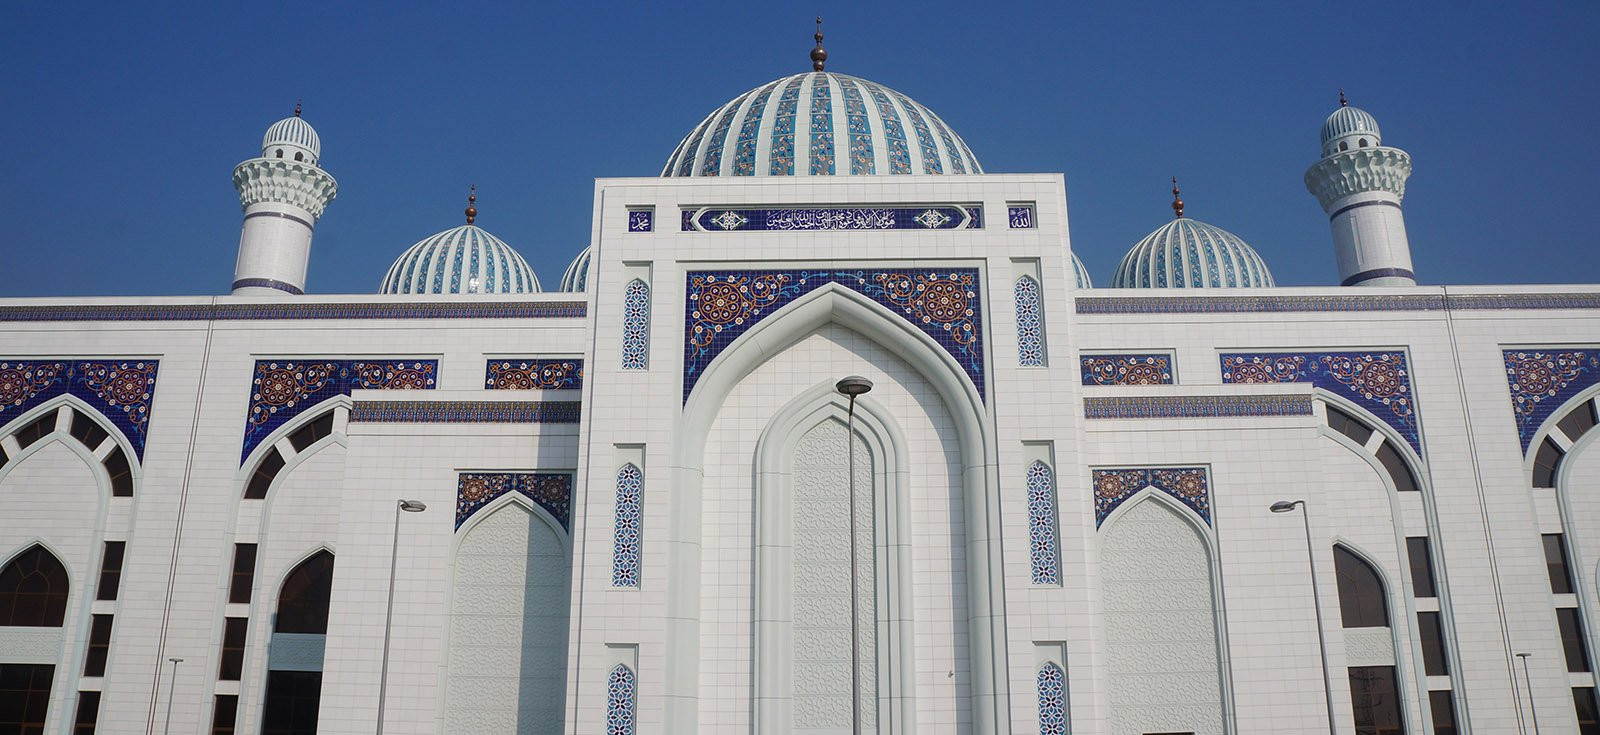 The Grand Mosque in Dushanbe